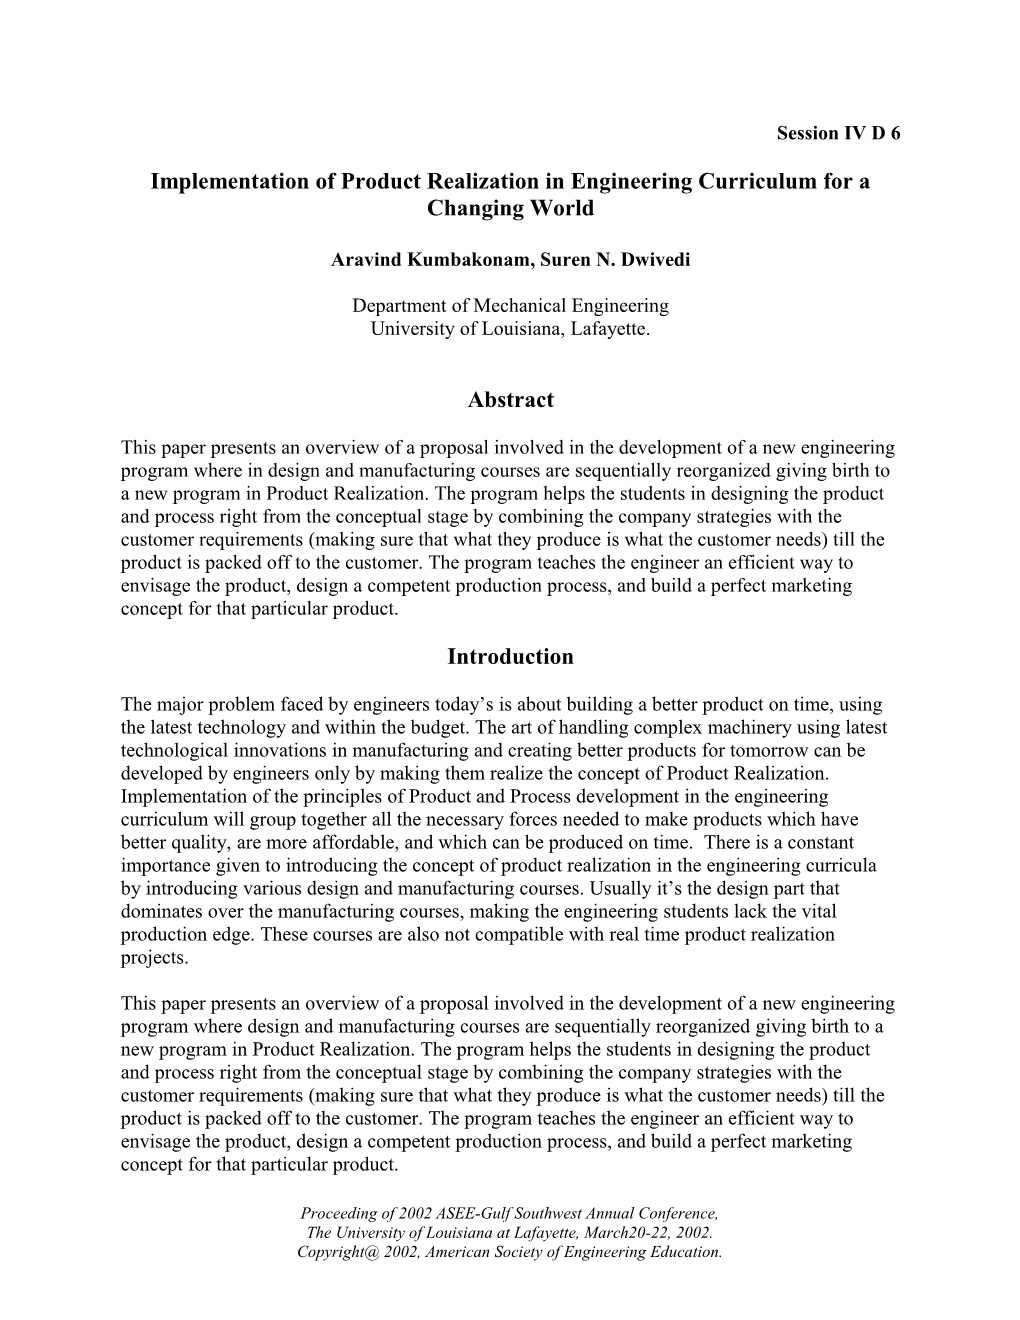 Implementation of Product Realization in Engineering Curriculum for a Changing World